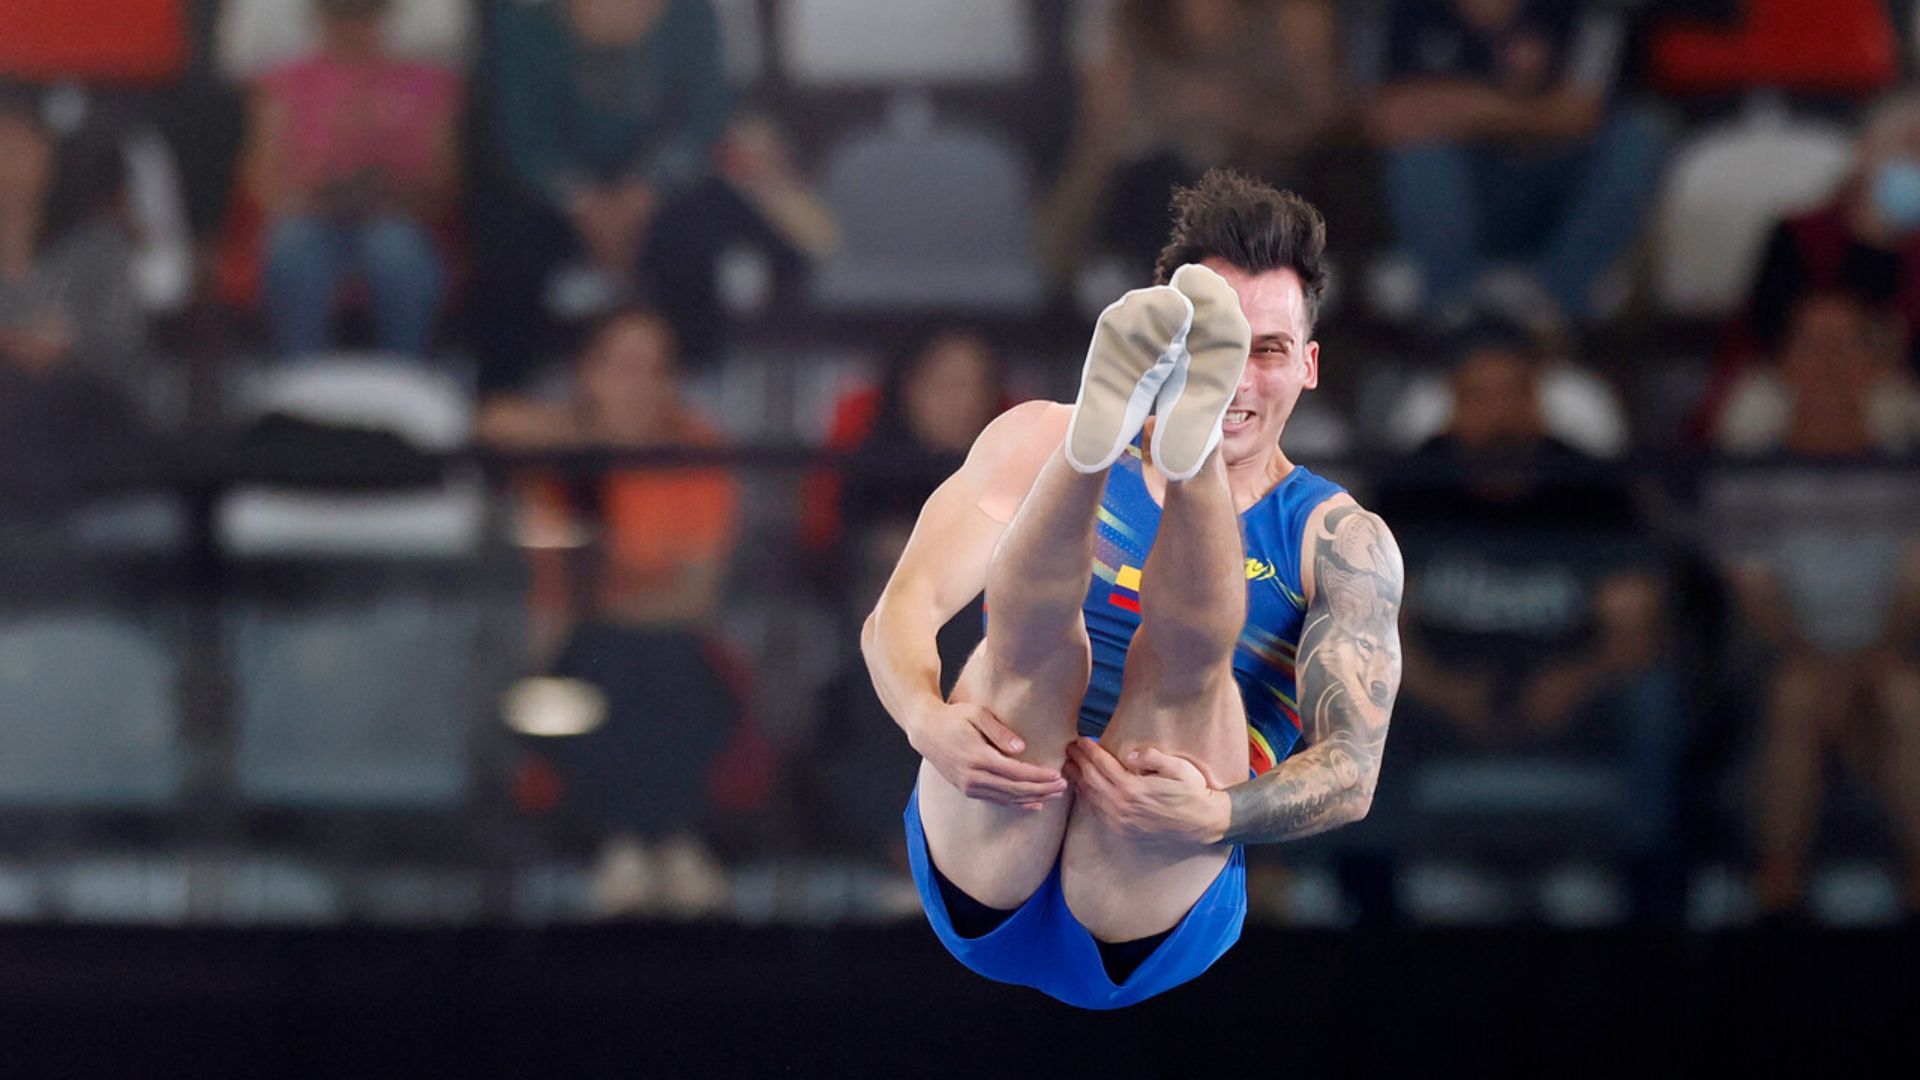 United States and Colombia claim gold in Pan American trampoline competition